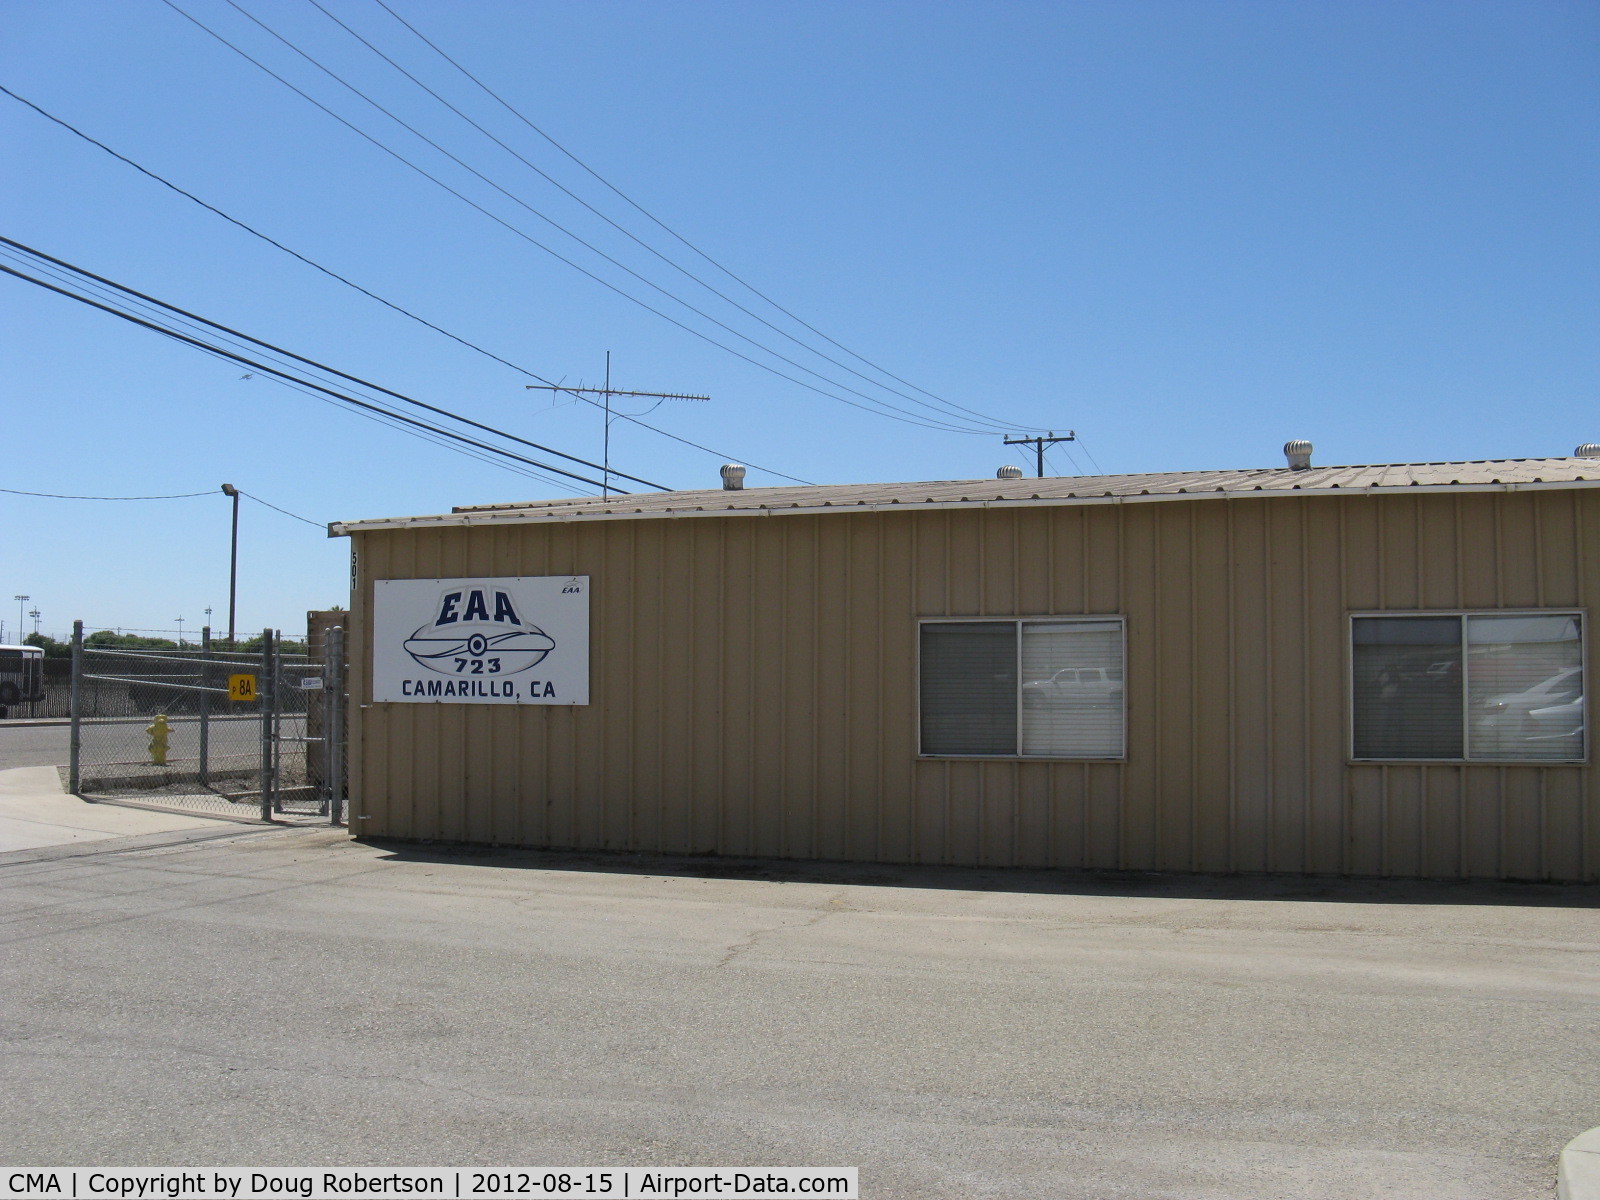 Camarillo Airport (CMA) - EAA Chapter 723 Building, Chapter 723 met at SZP prior to CMA becoming a General Aviation Airport in 1976.